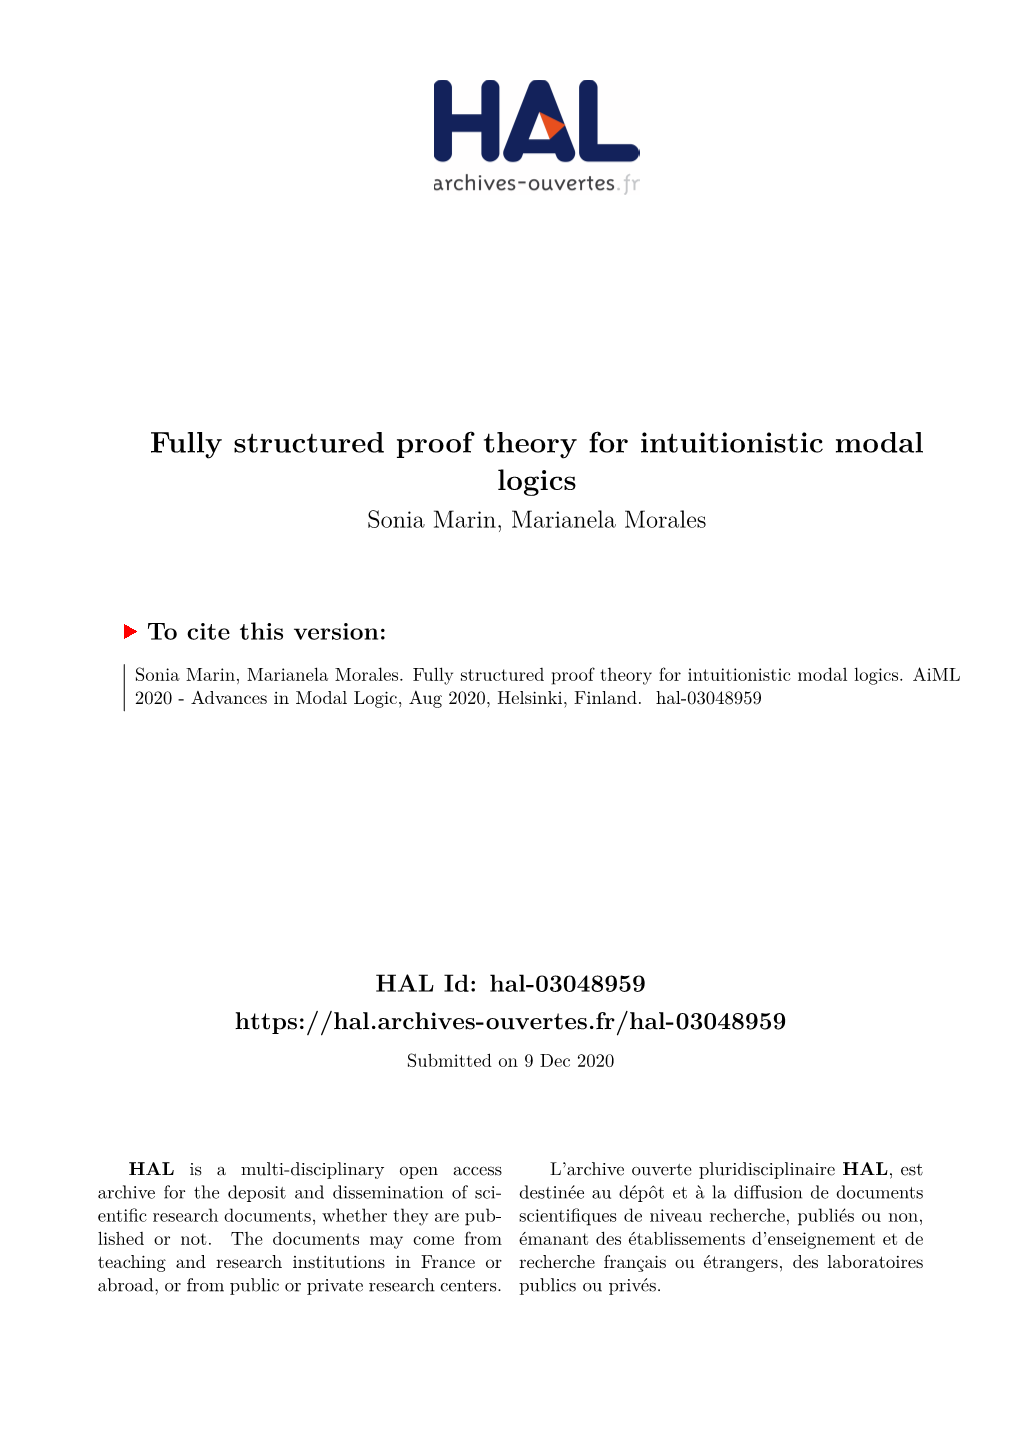 Fully Structured Proof Theory for Intuitionistic Modal Logics Sonia Marin, Marianela Morales